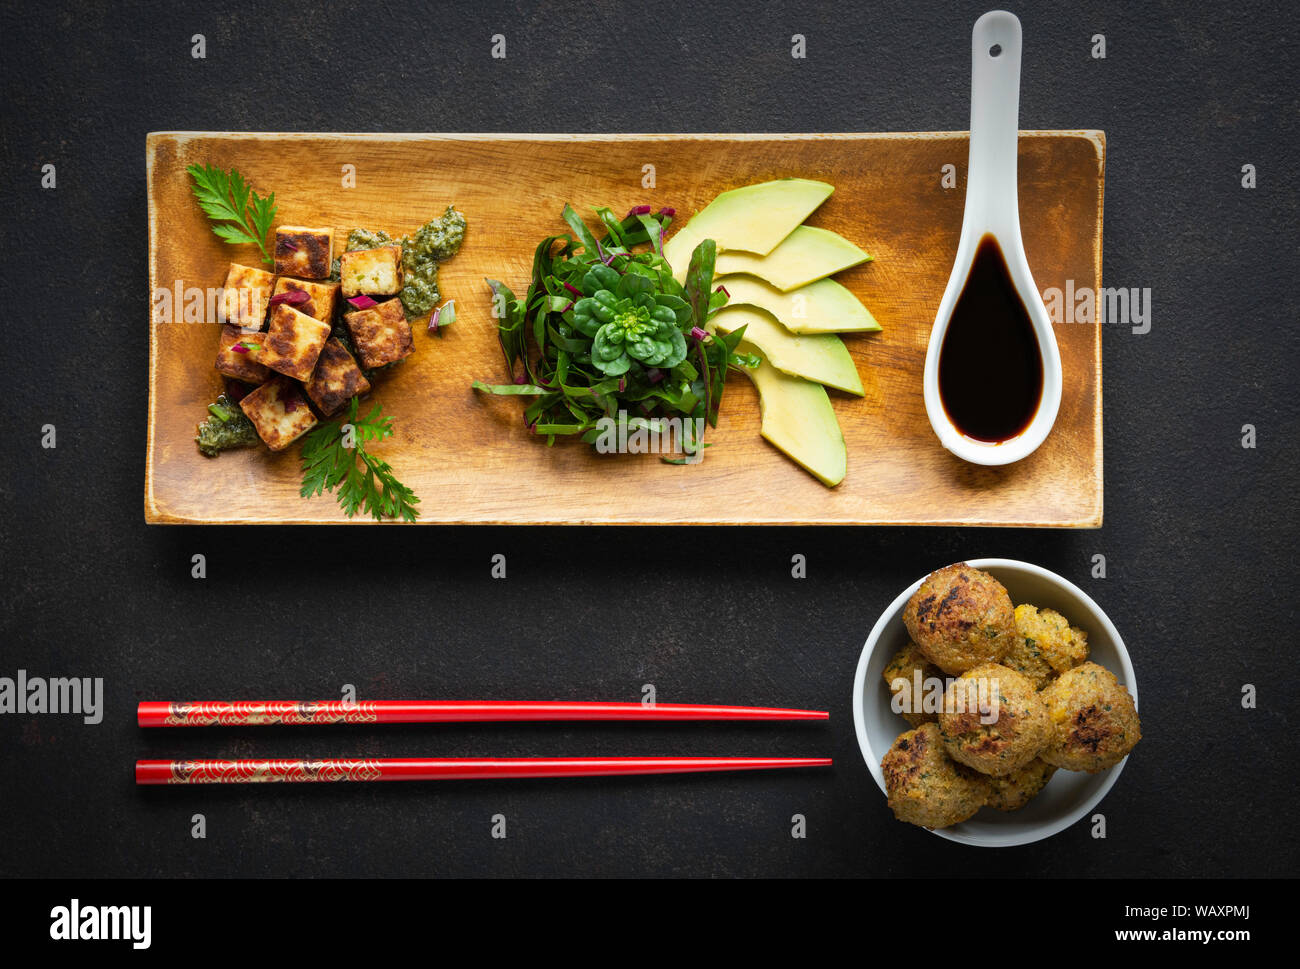 plate decorated with tofu, vegetables and avocado on black stone with falafel and Chinese chopsticks Stock Photo